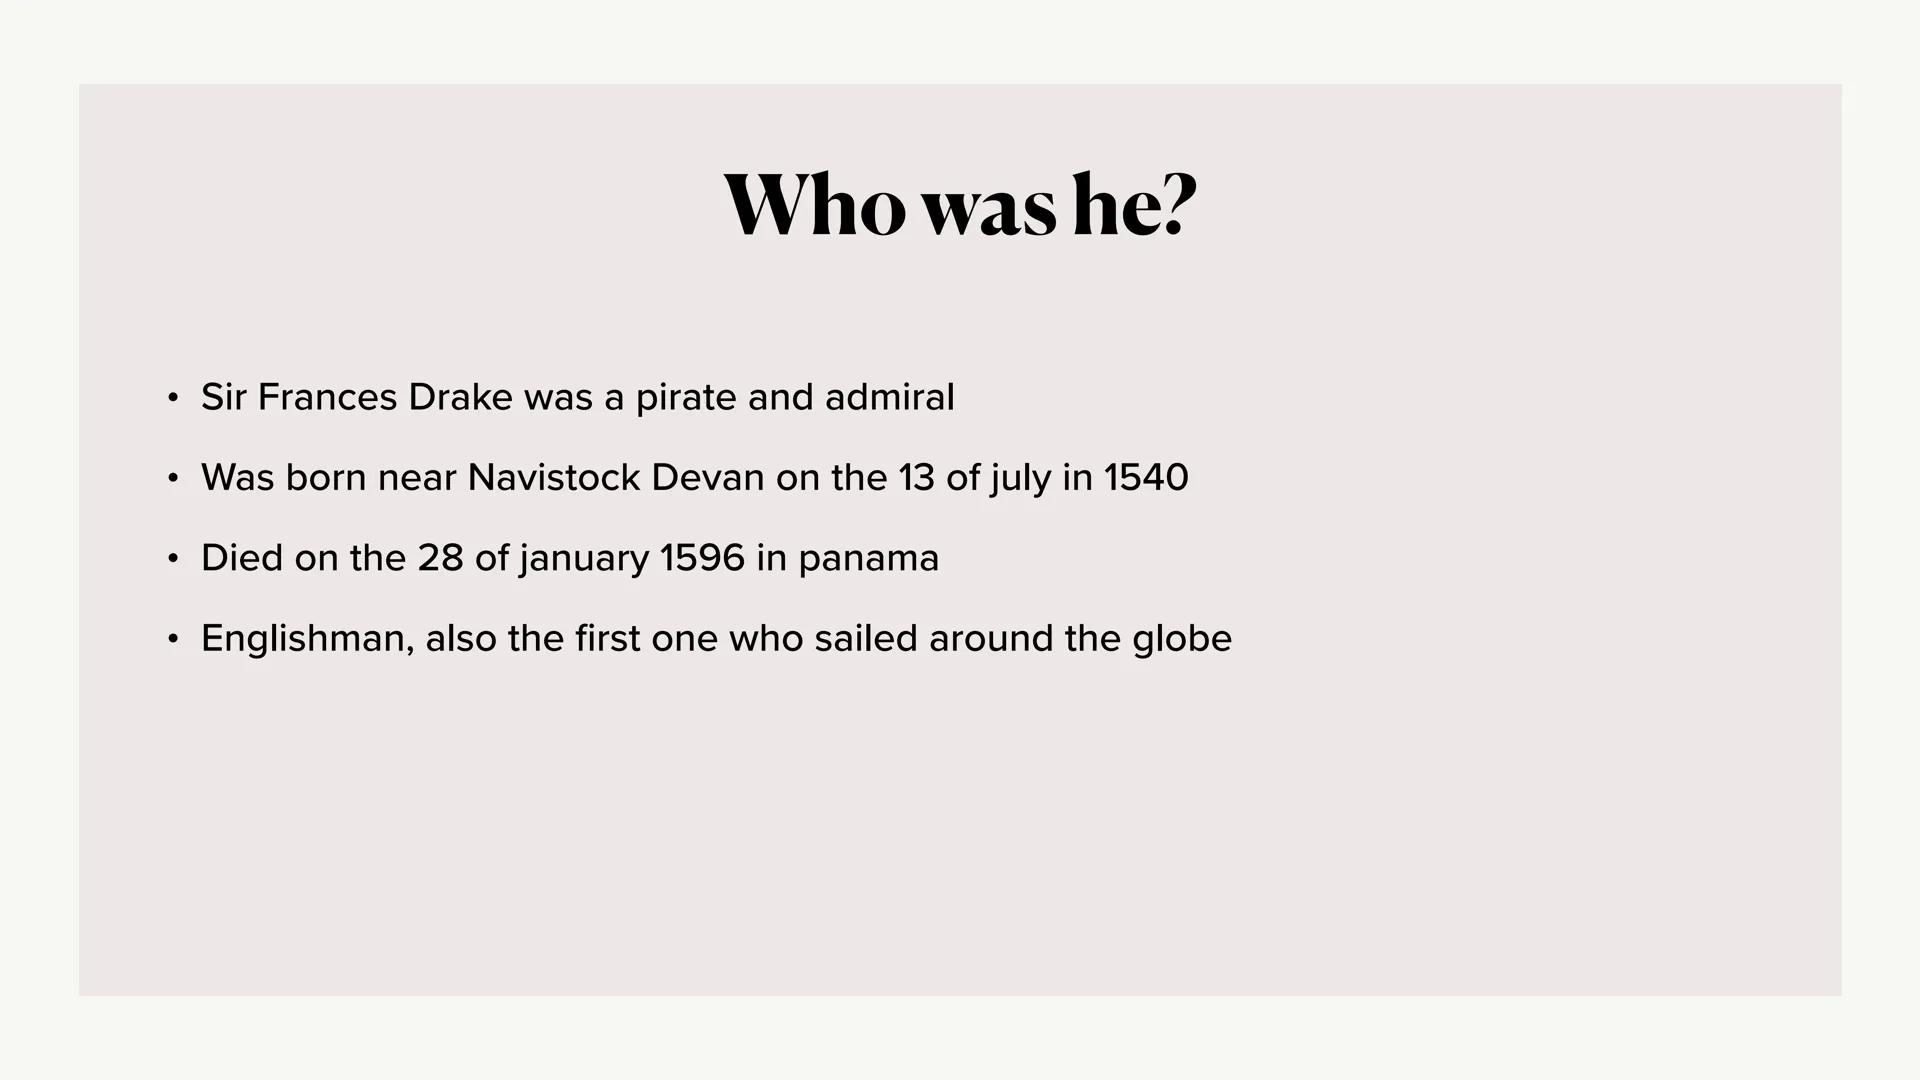 
<h2 id="whowashe">Who Was He?</h2>
<p>Sir Frances Drake was a pirate and admiral. He was born near Navistock Devan on the 13th of July in 1